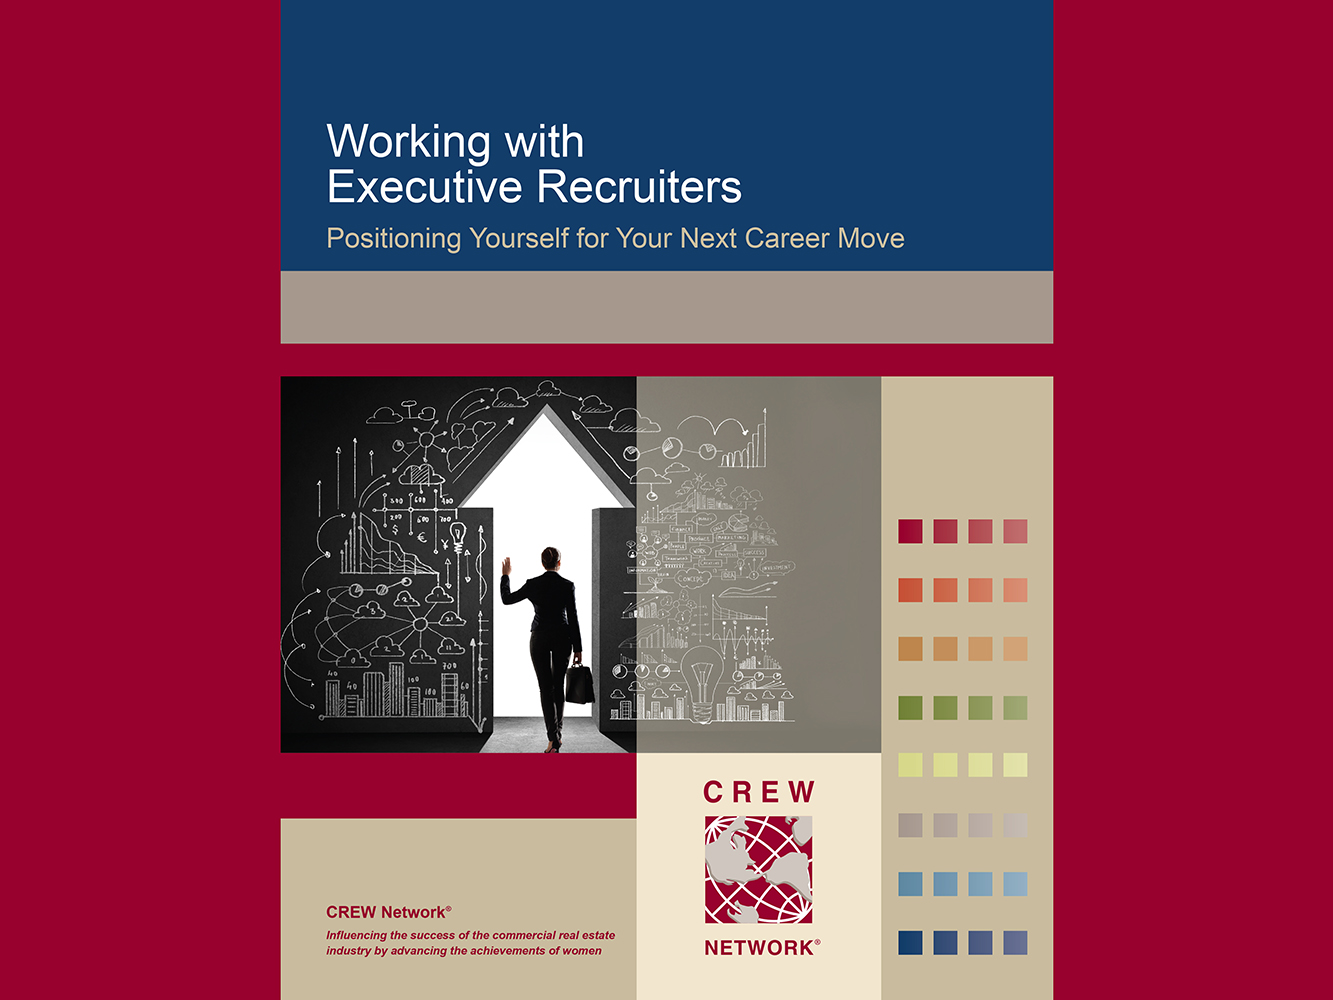 CREW Network White Paper Released - Working with Executive Recruiters